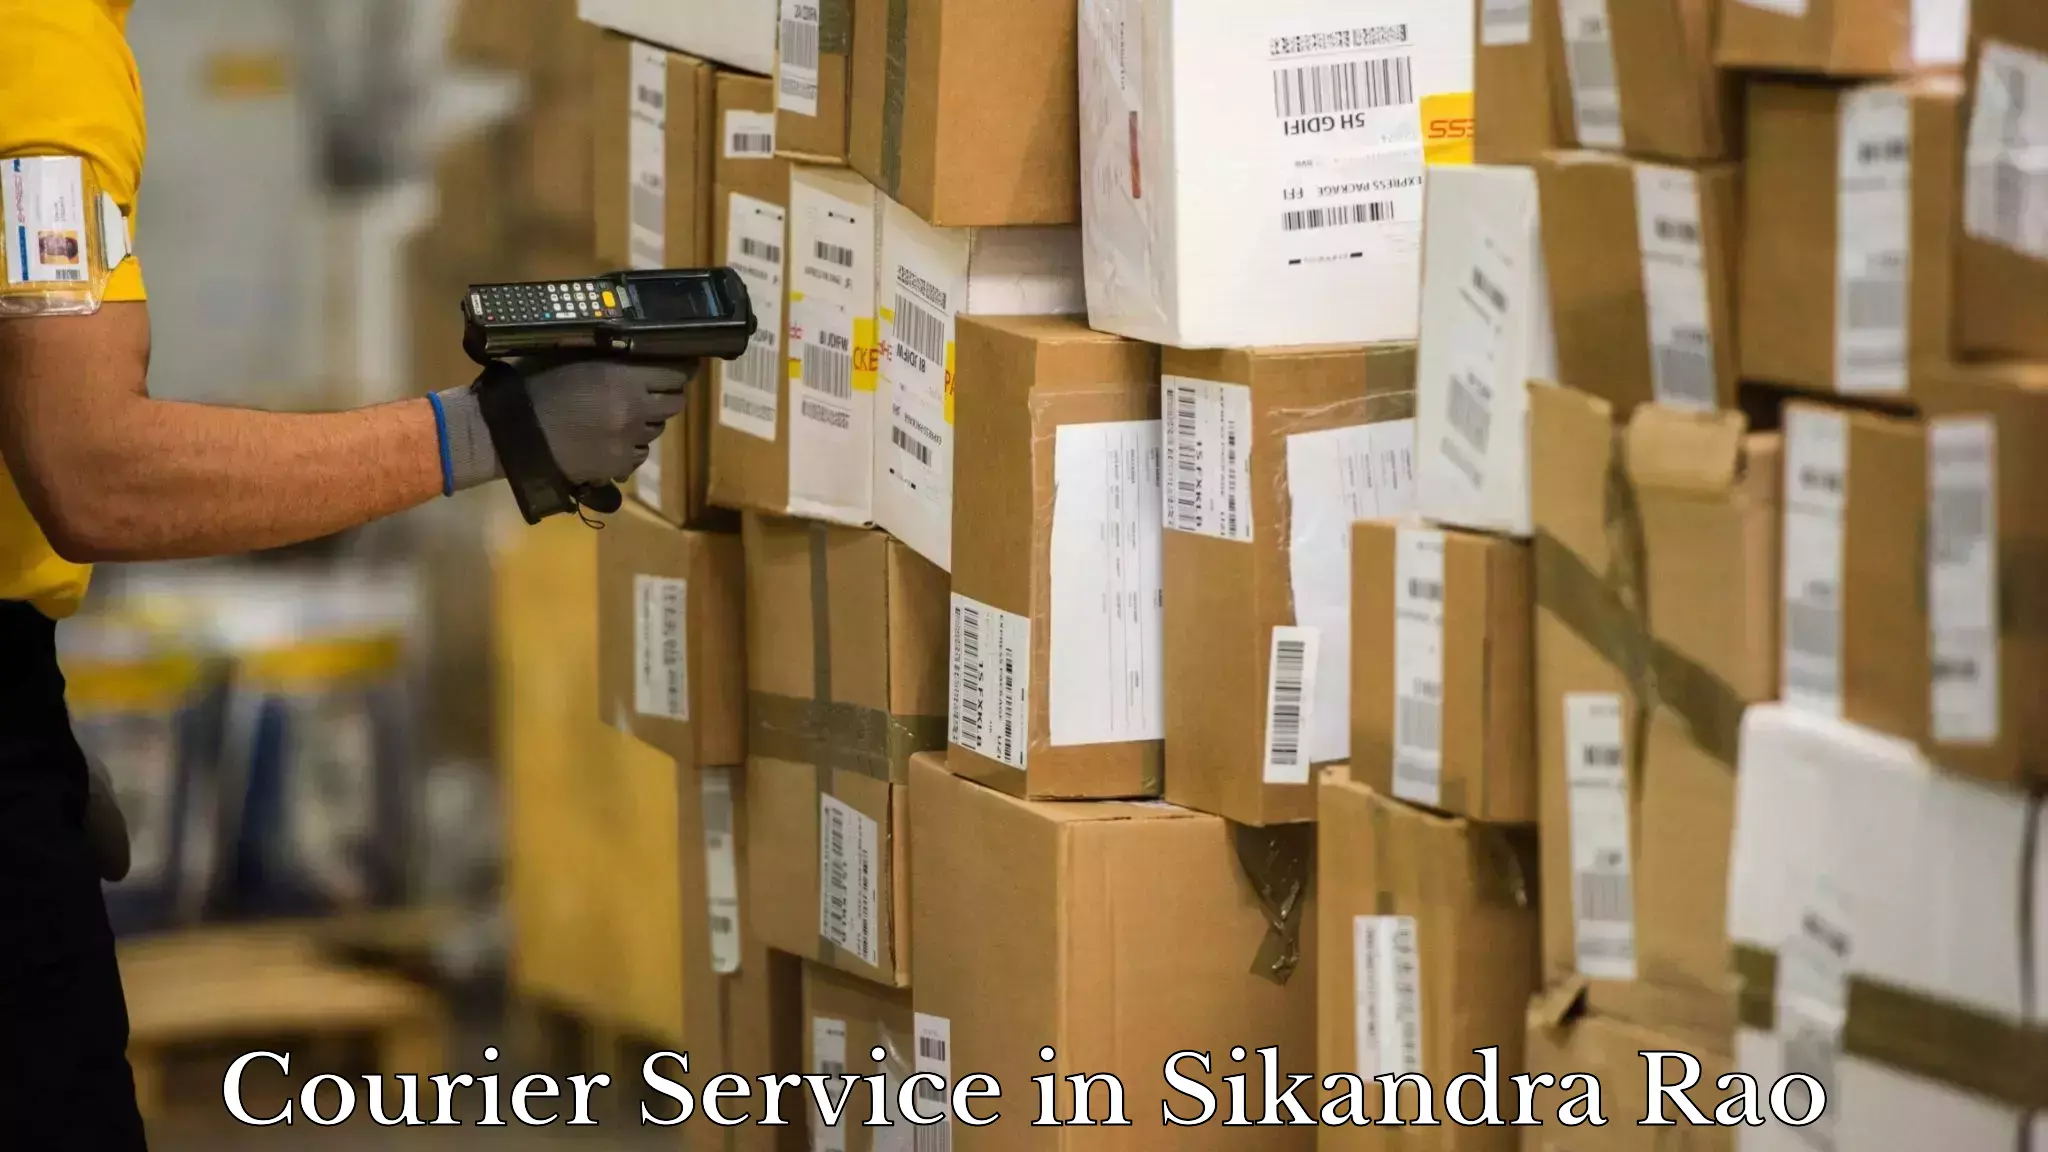 Nationwide shipping services in Sikandra Rao